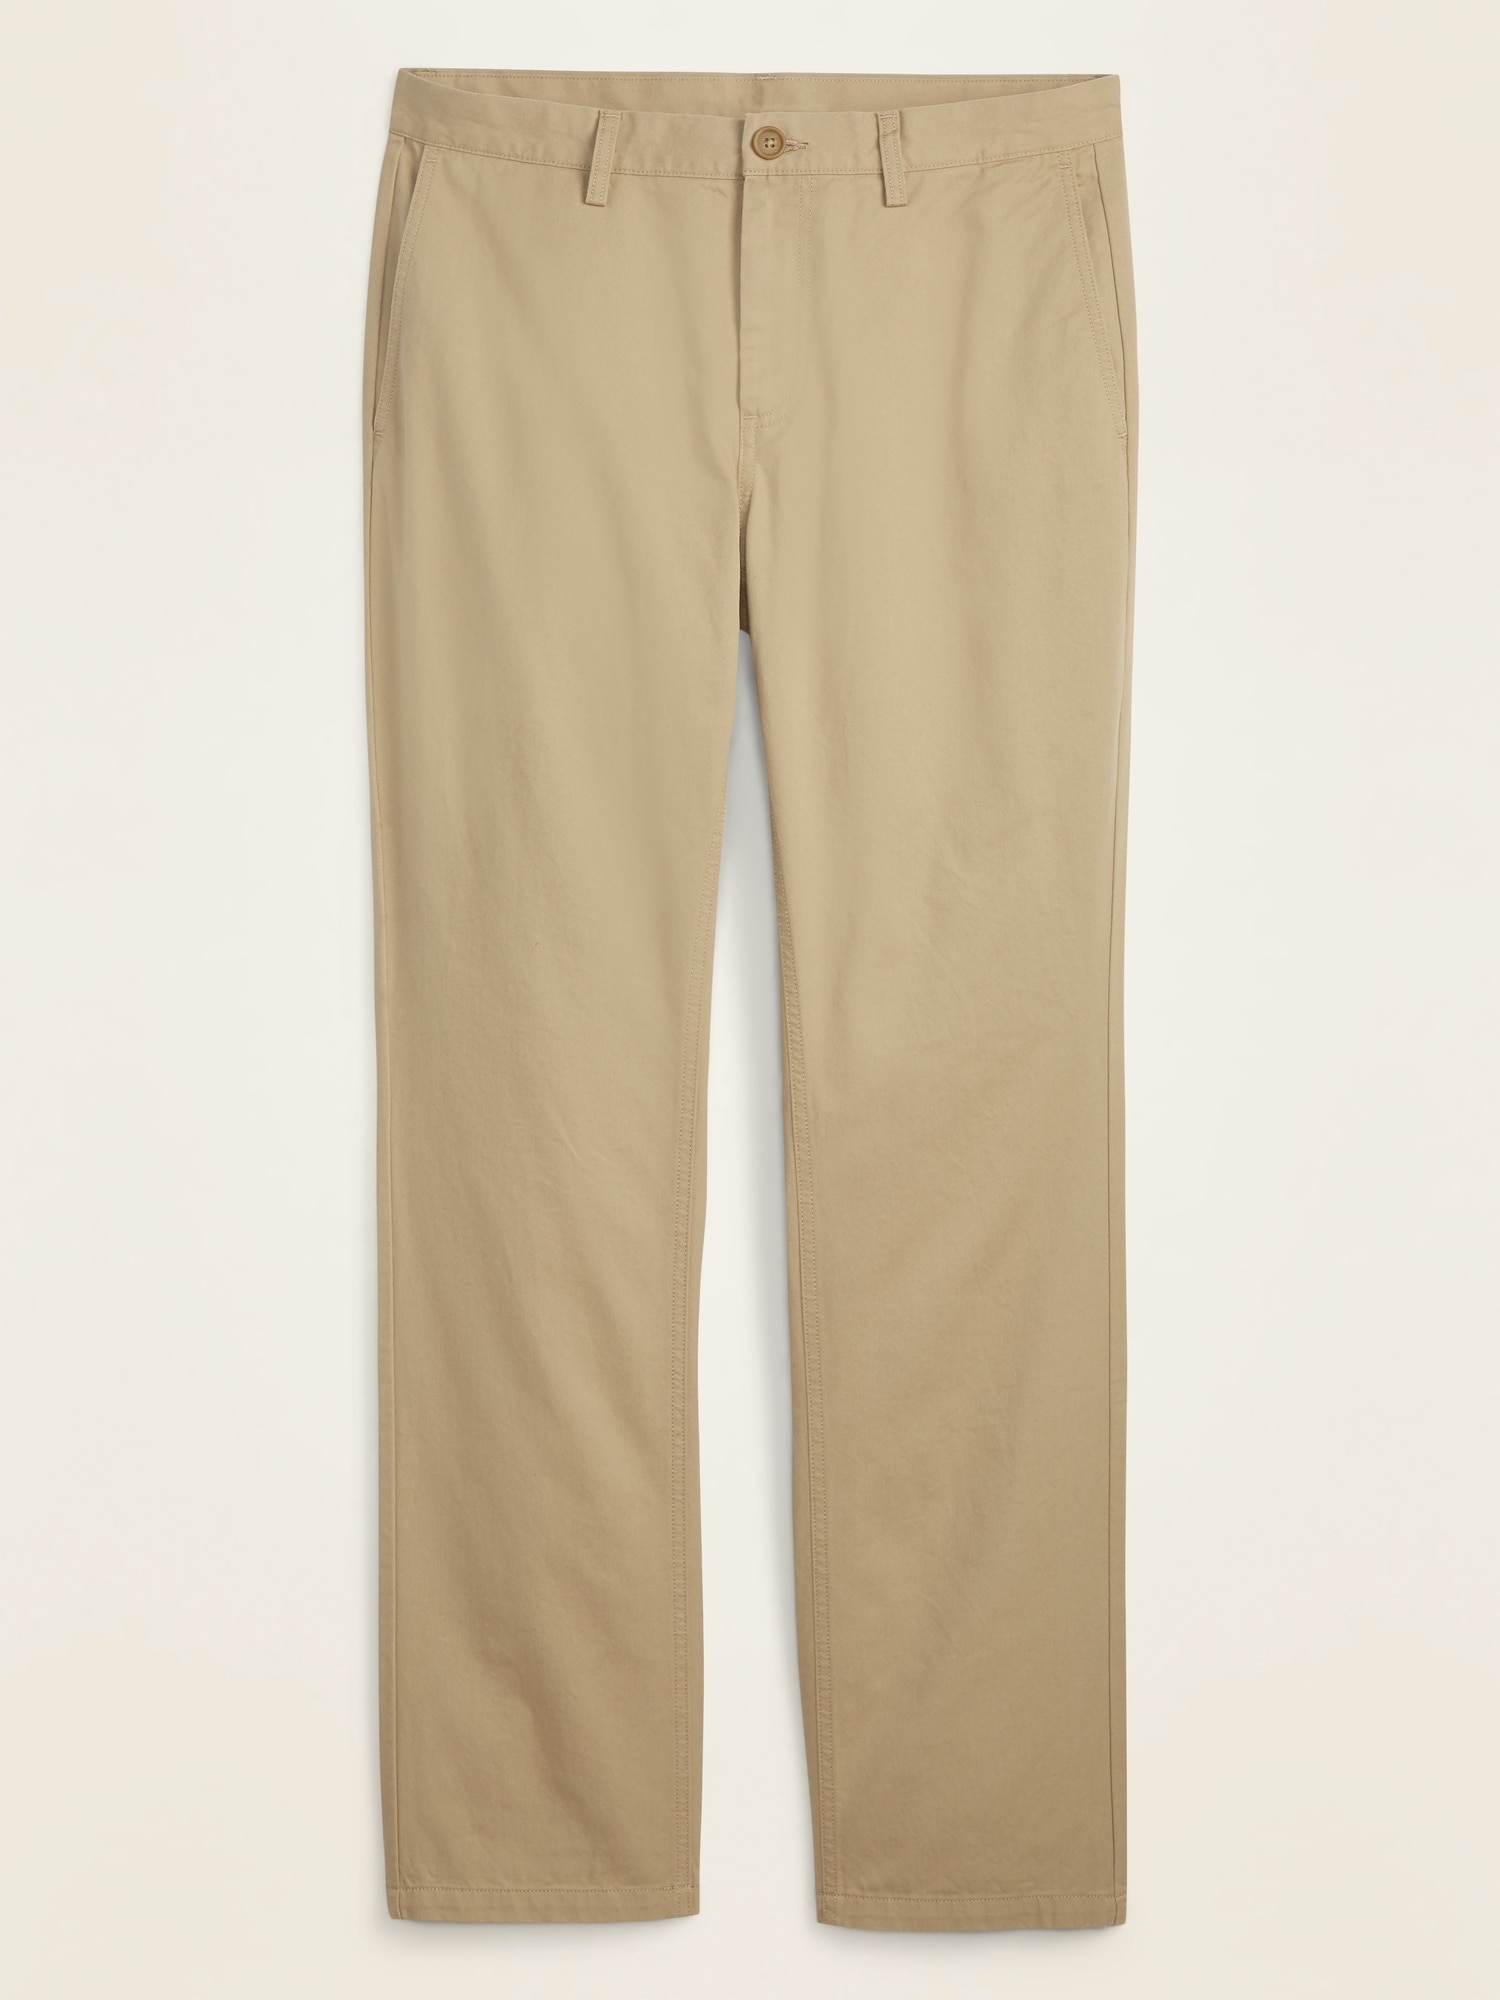 Straight Uniform Non Stretch Chino Pants For Men Old Navy